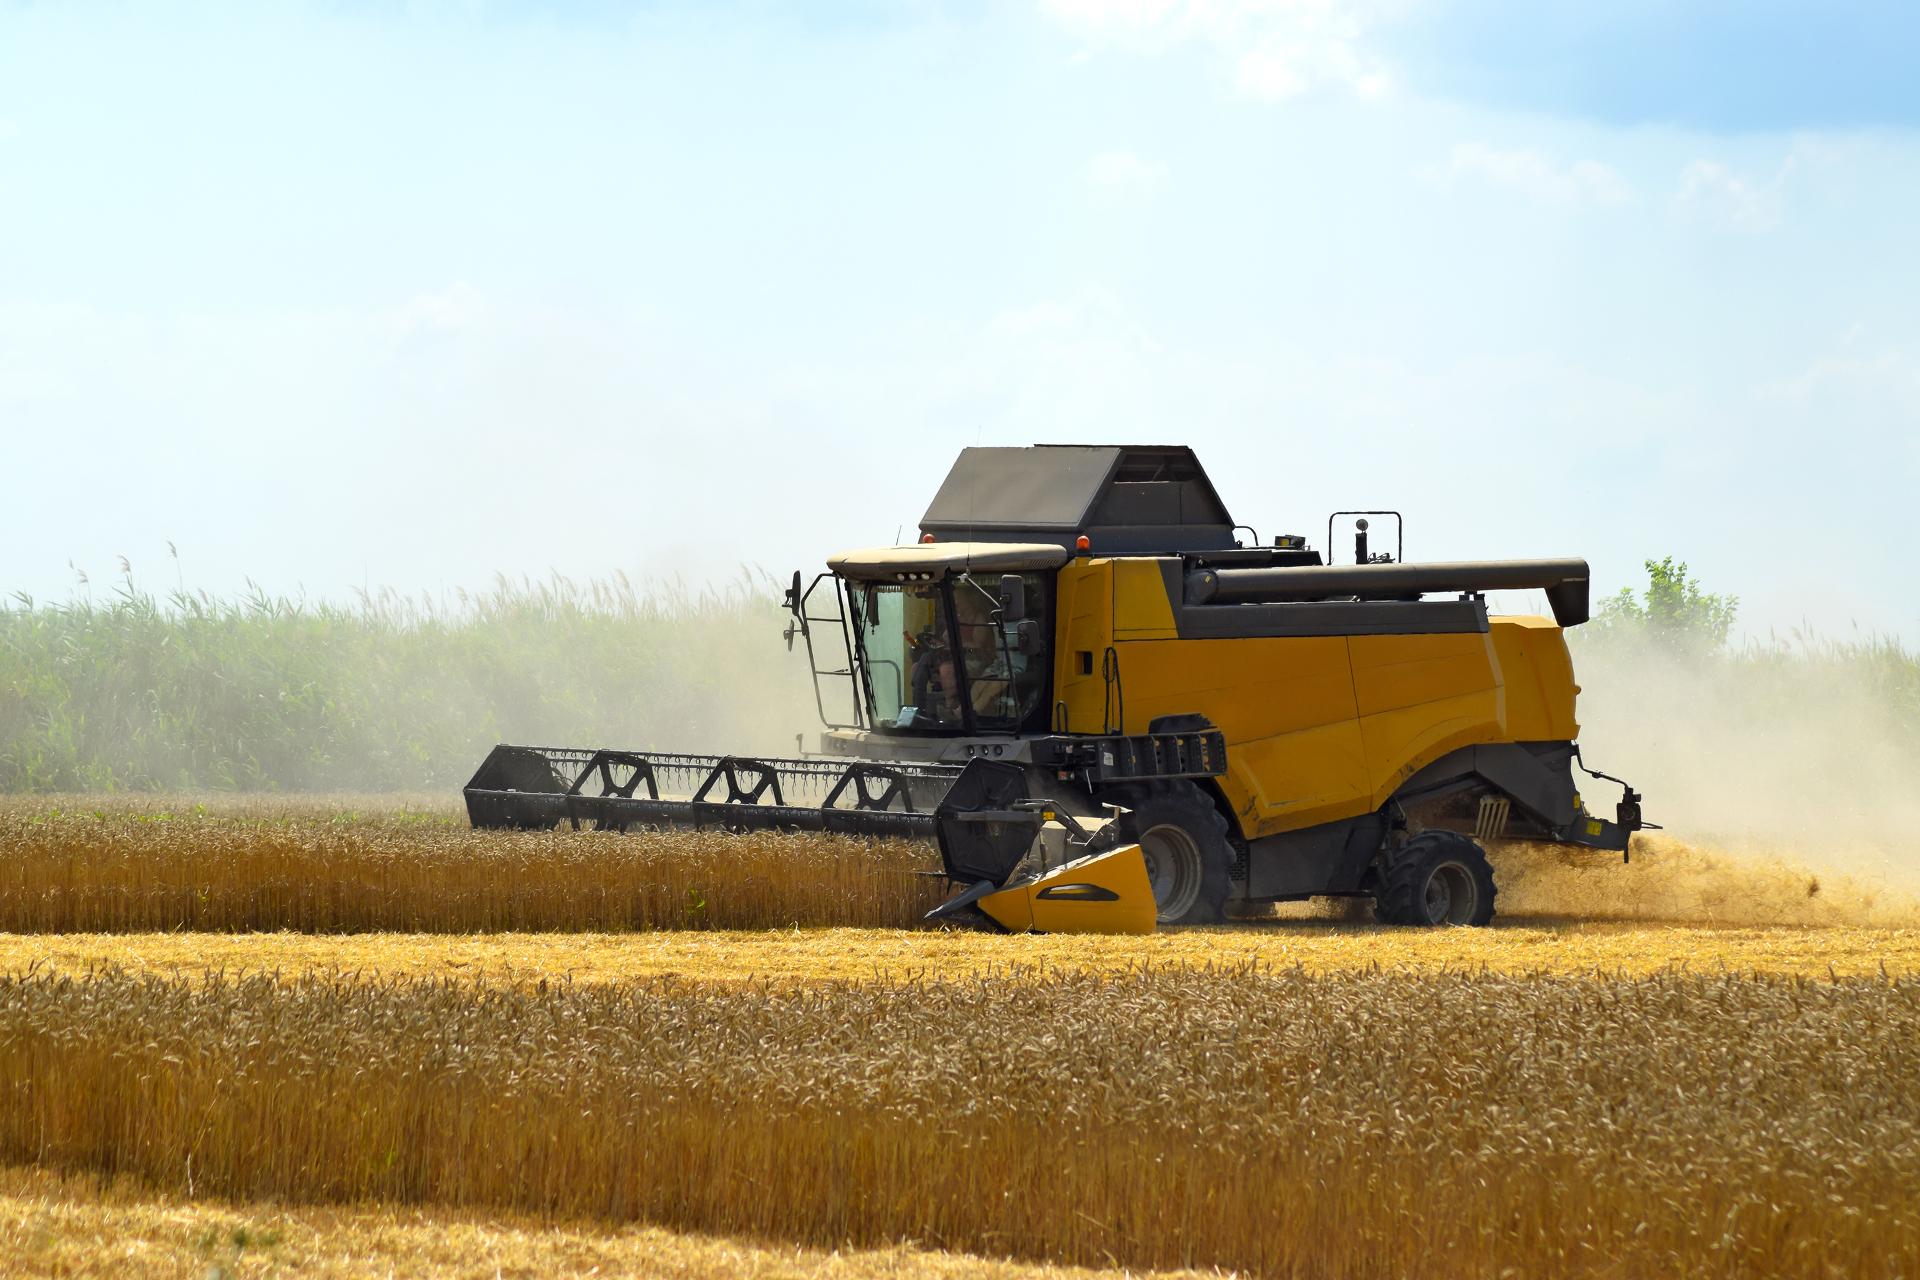 Assets up for sale as Scottish grain merchant falls into administration